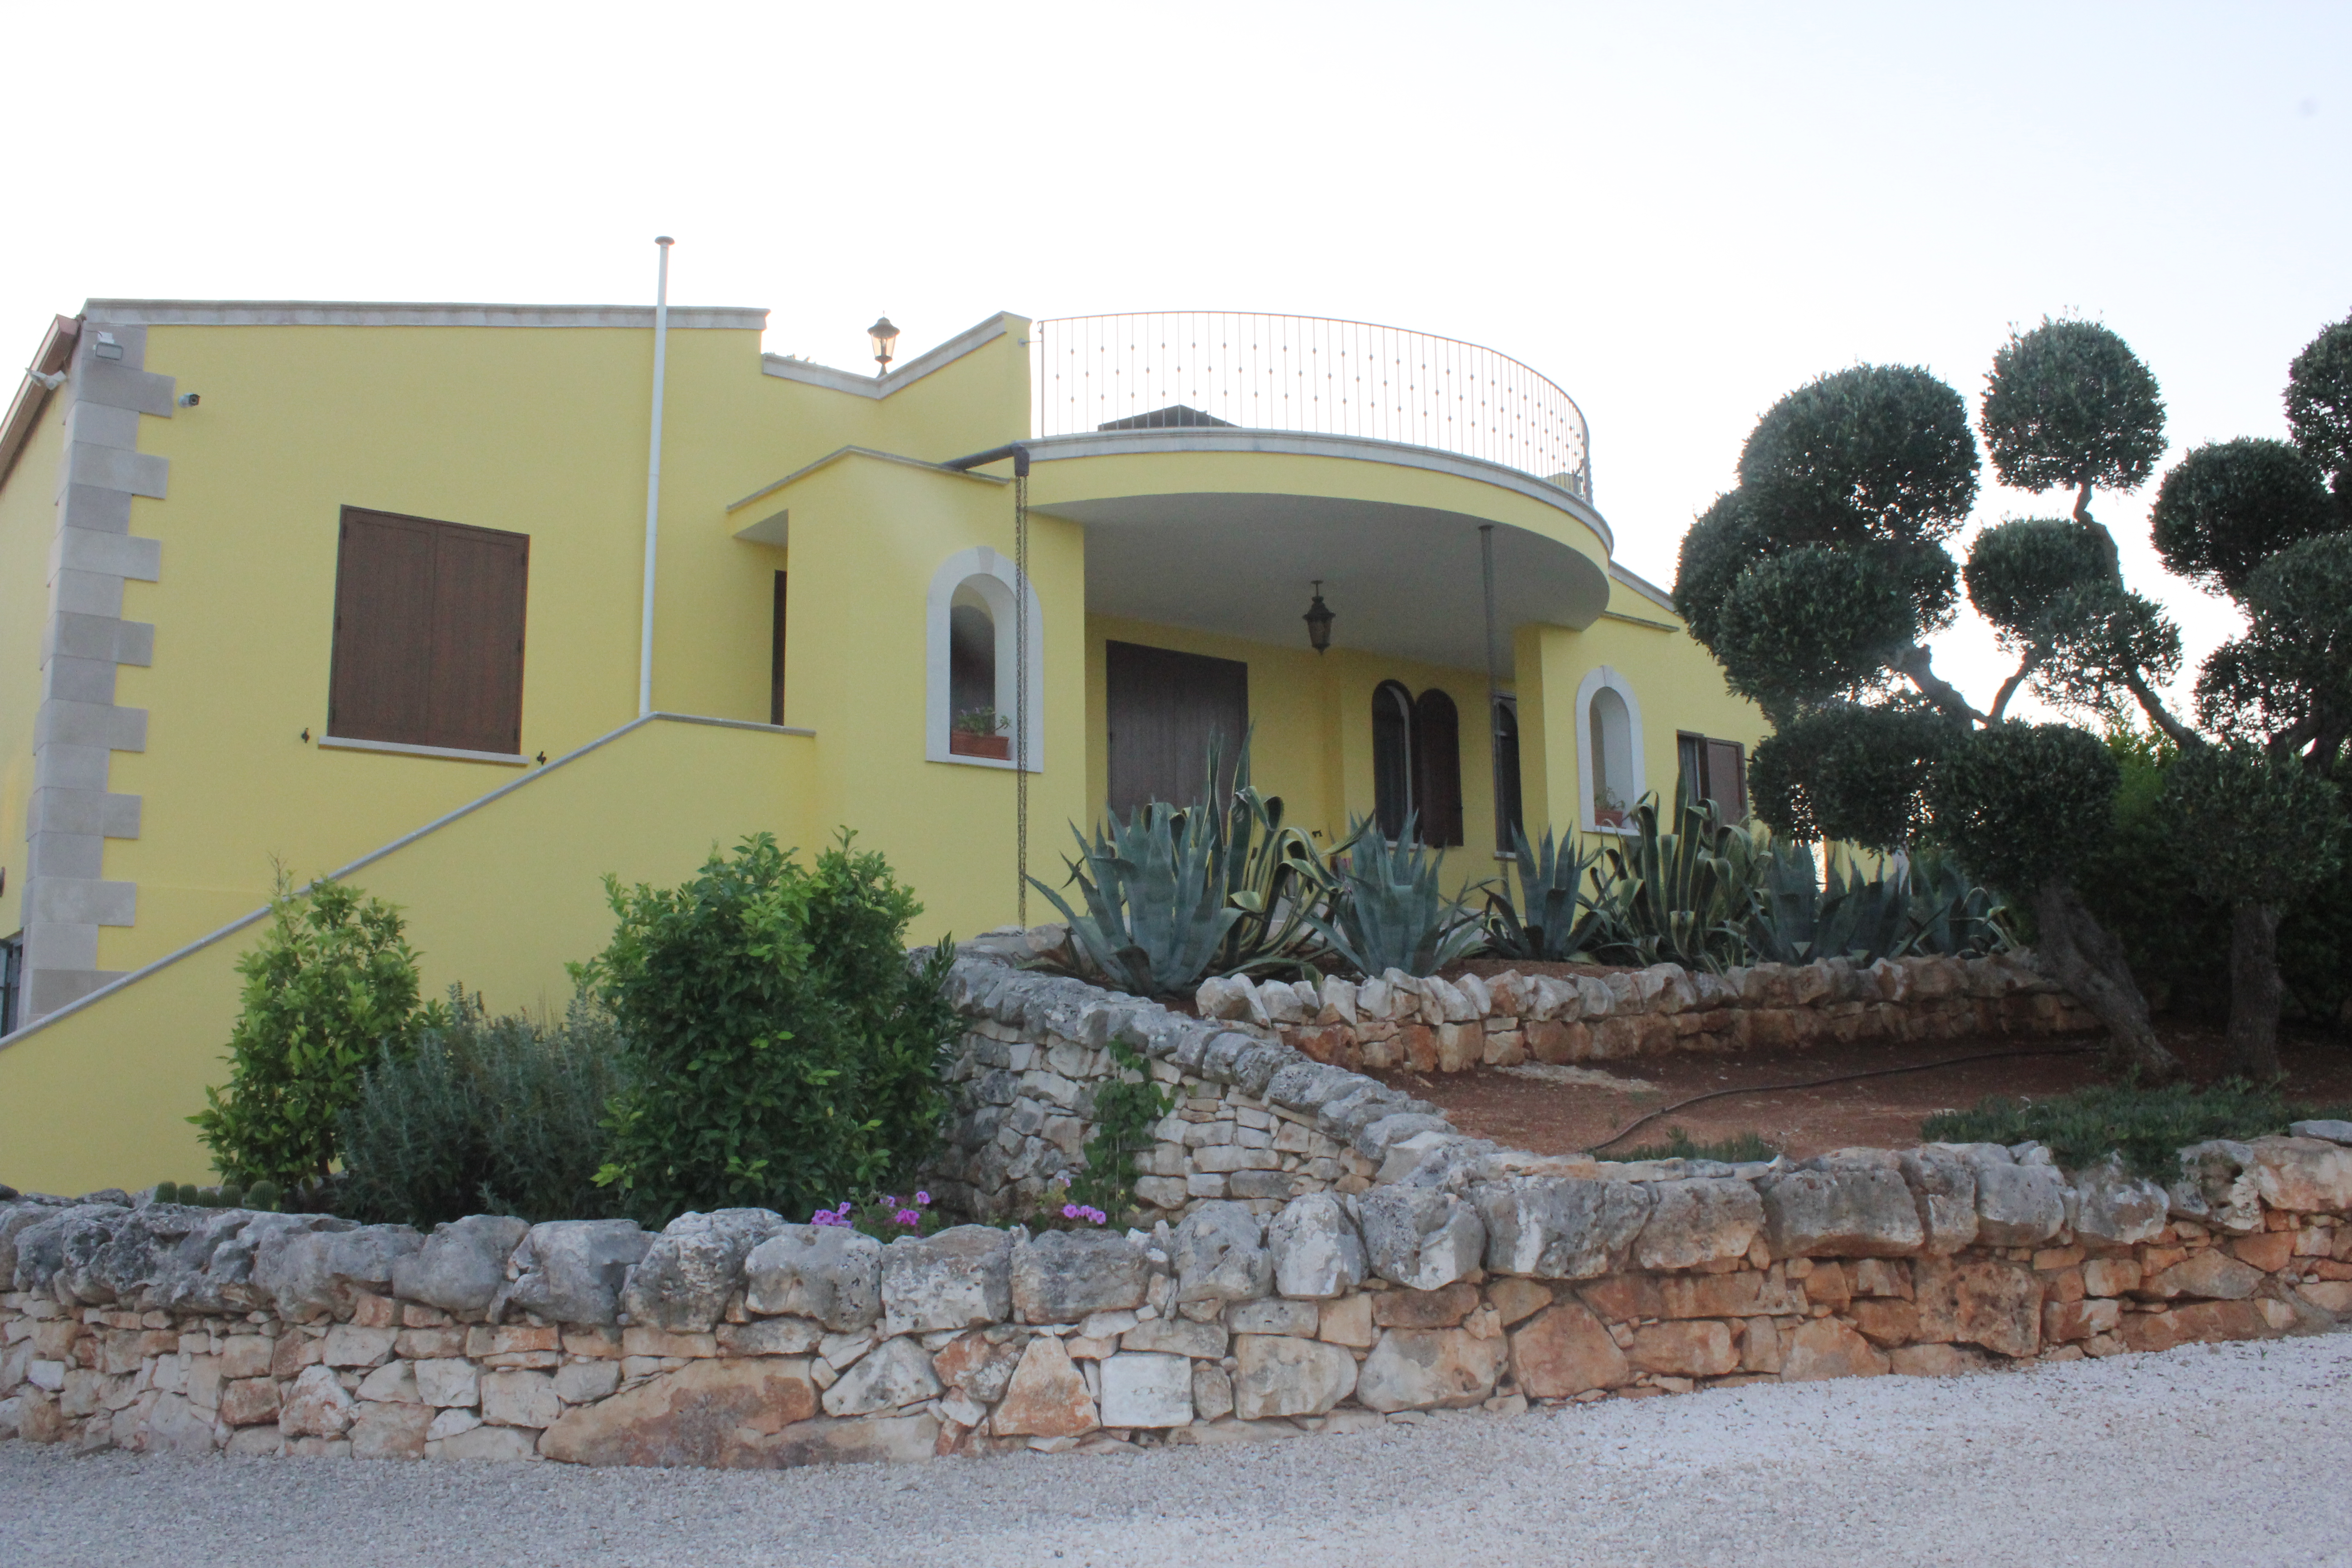 The villa where 19 adults and children stayed in Puglia